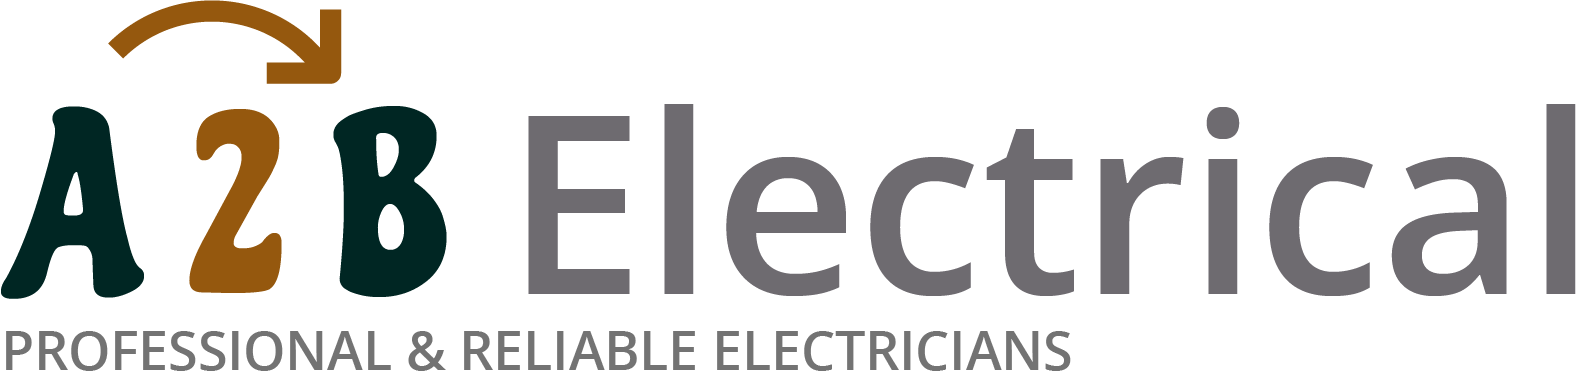 If you have electrical wiring problems in Totteridge, we can provide an electrician to have a look for you. 